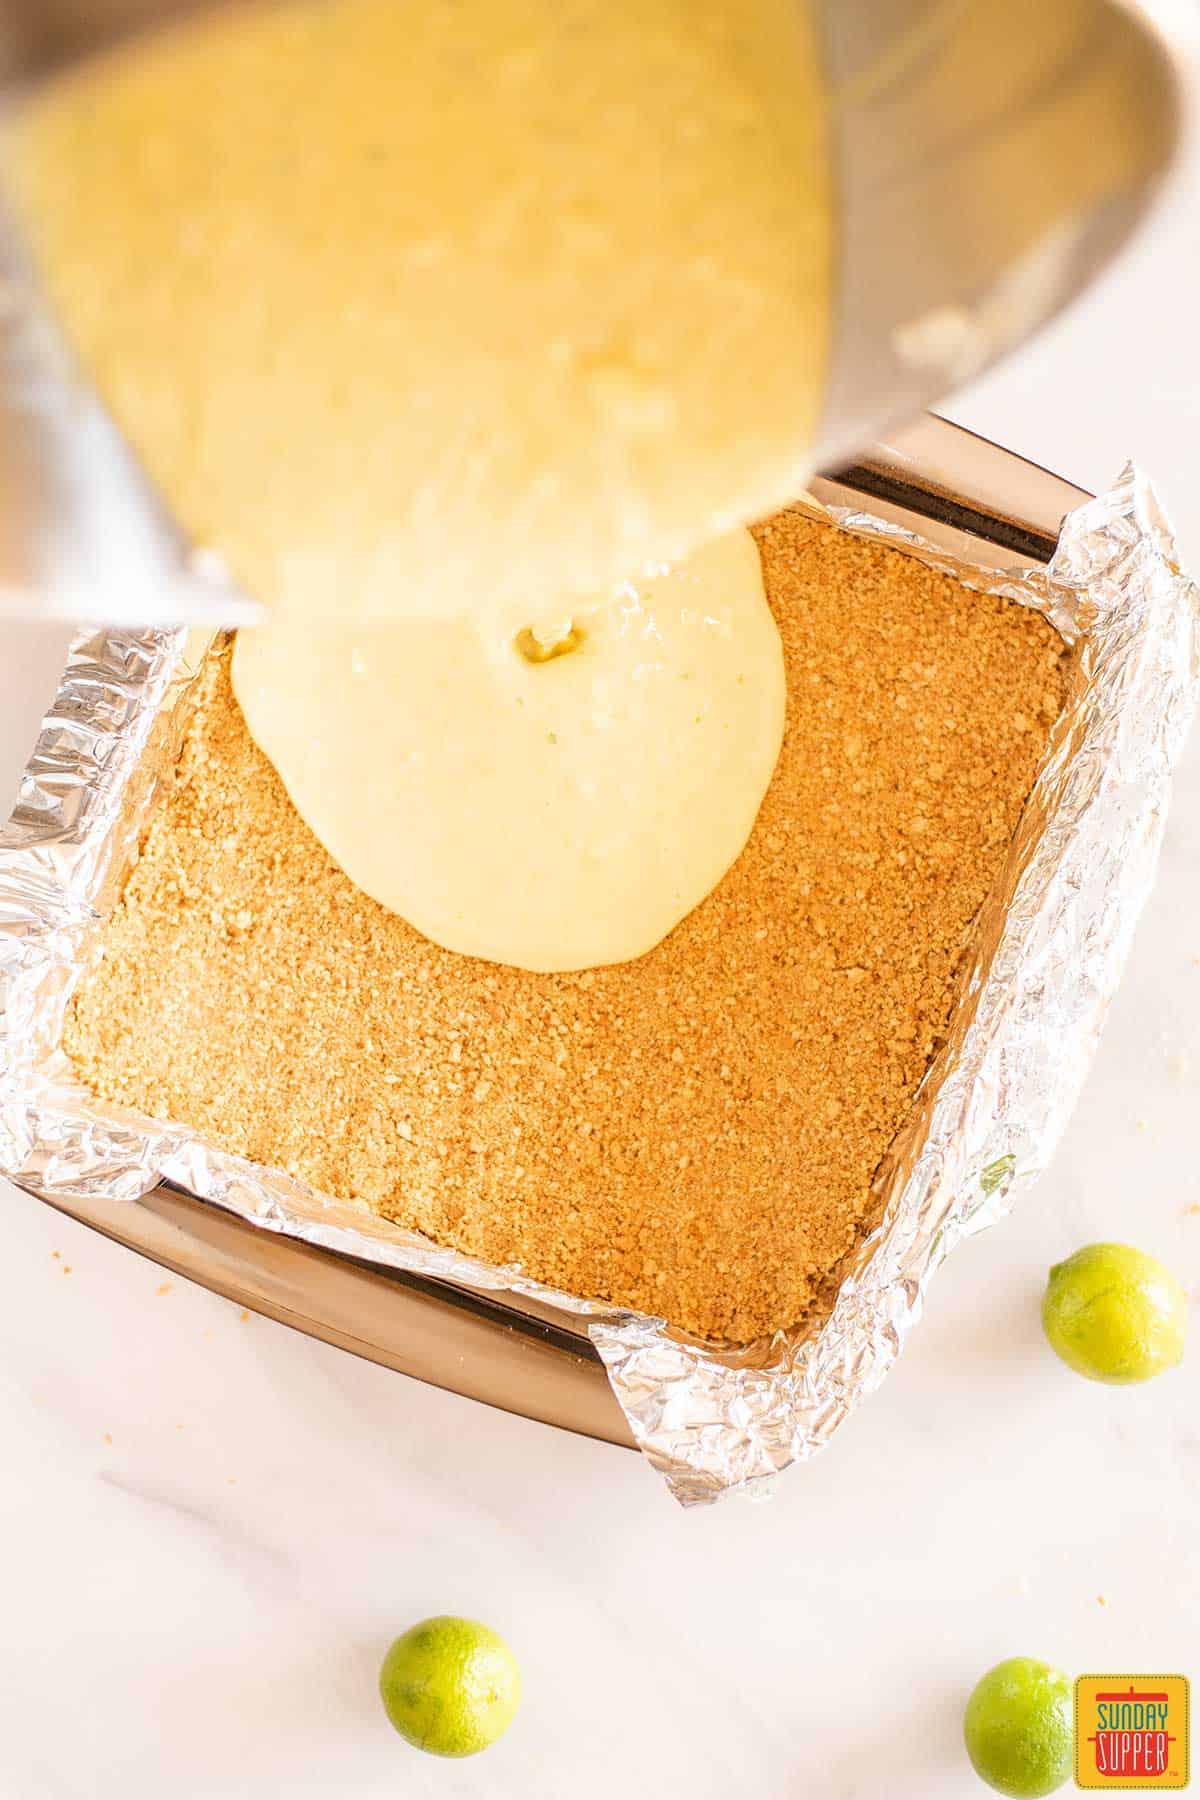 Pouring key lime pie filling into the cookie crust in the foil